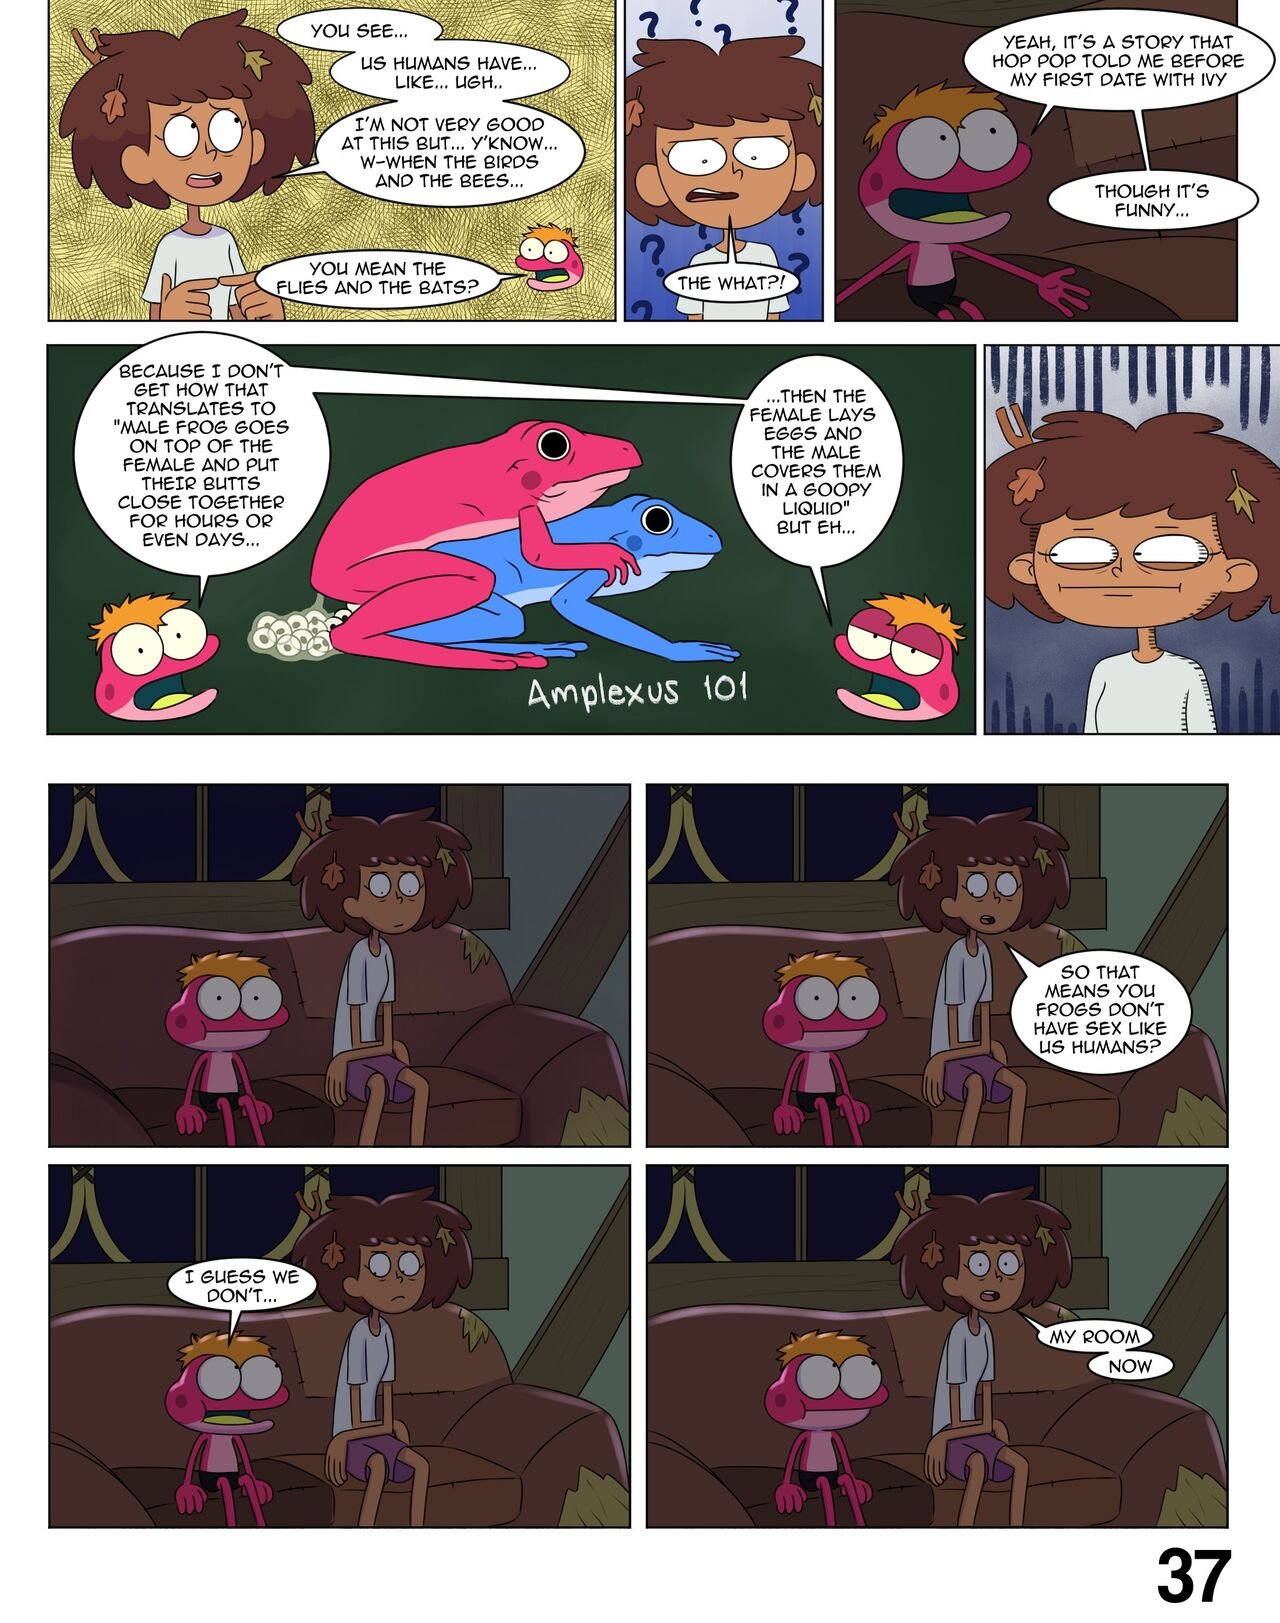 Nocunoct - Oh My Frog! (amphibia) porn comic.